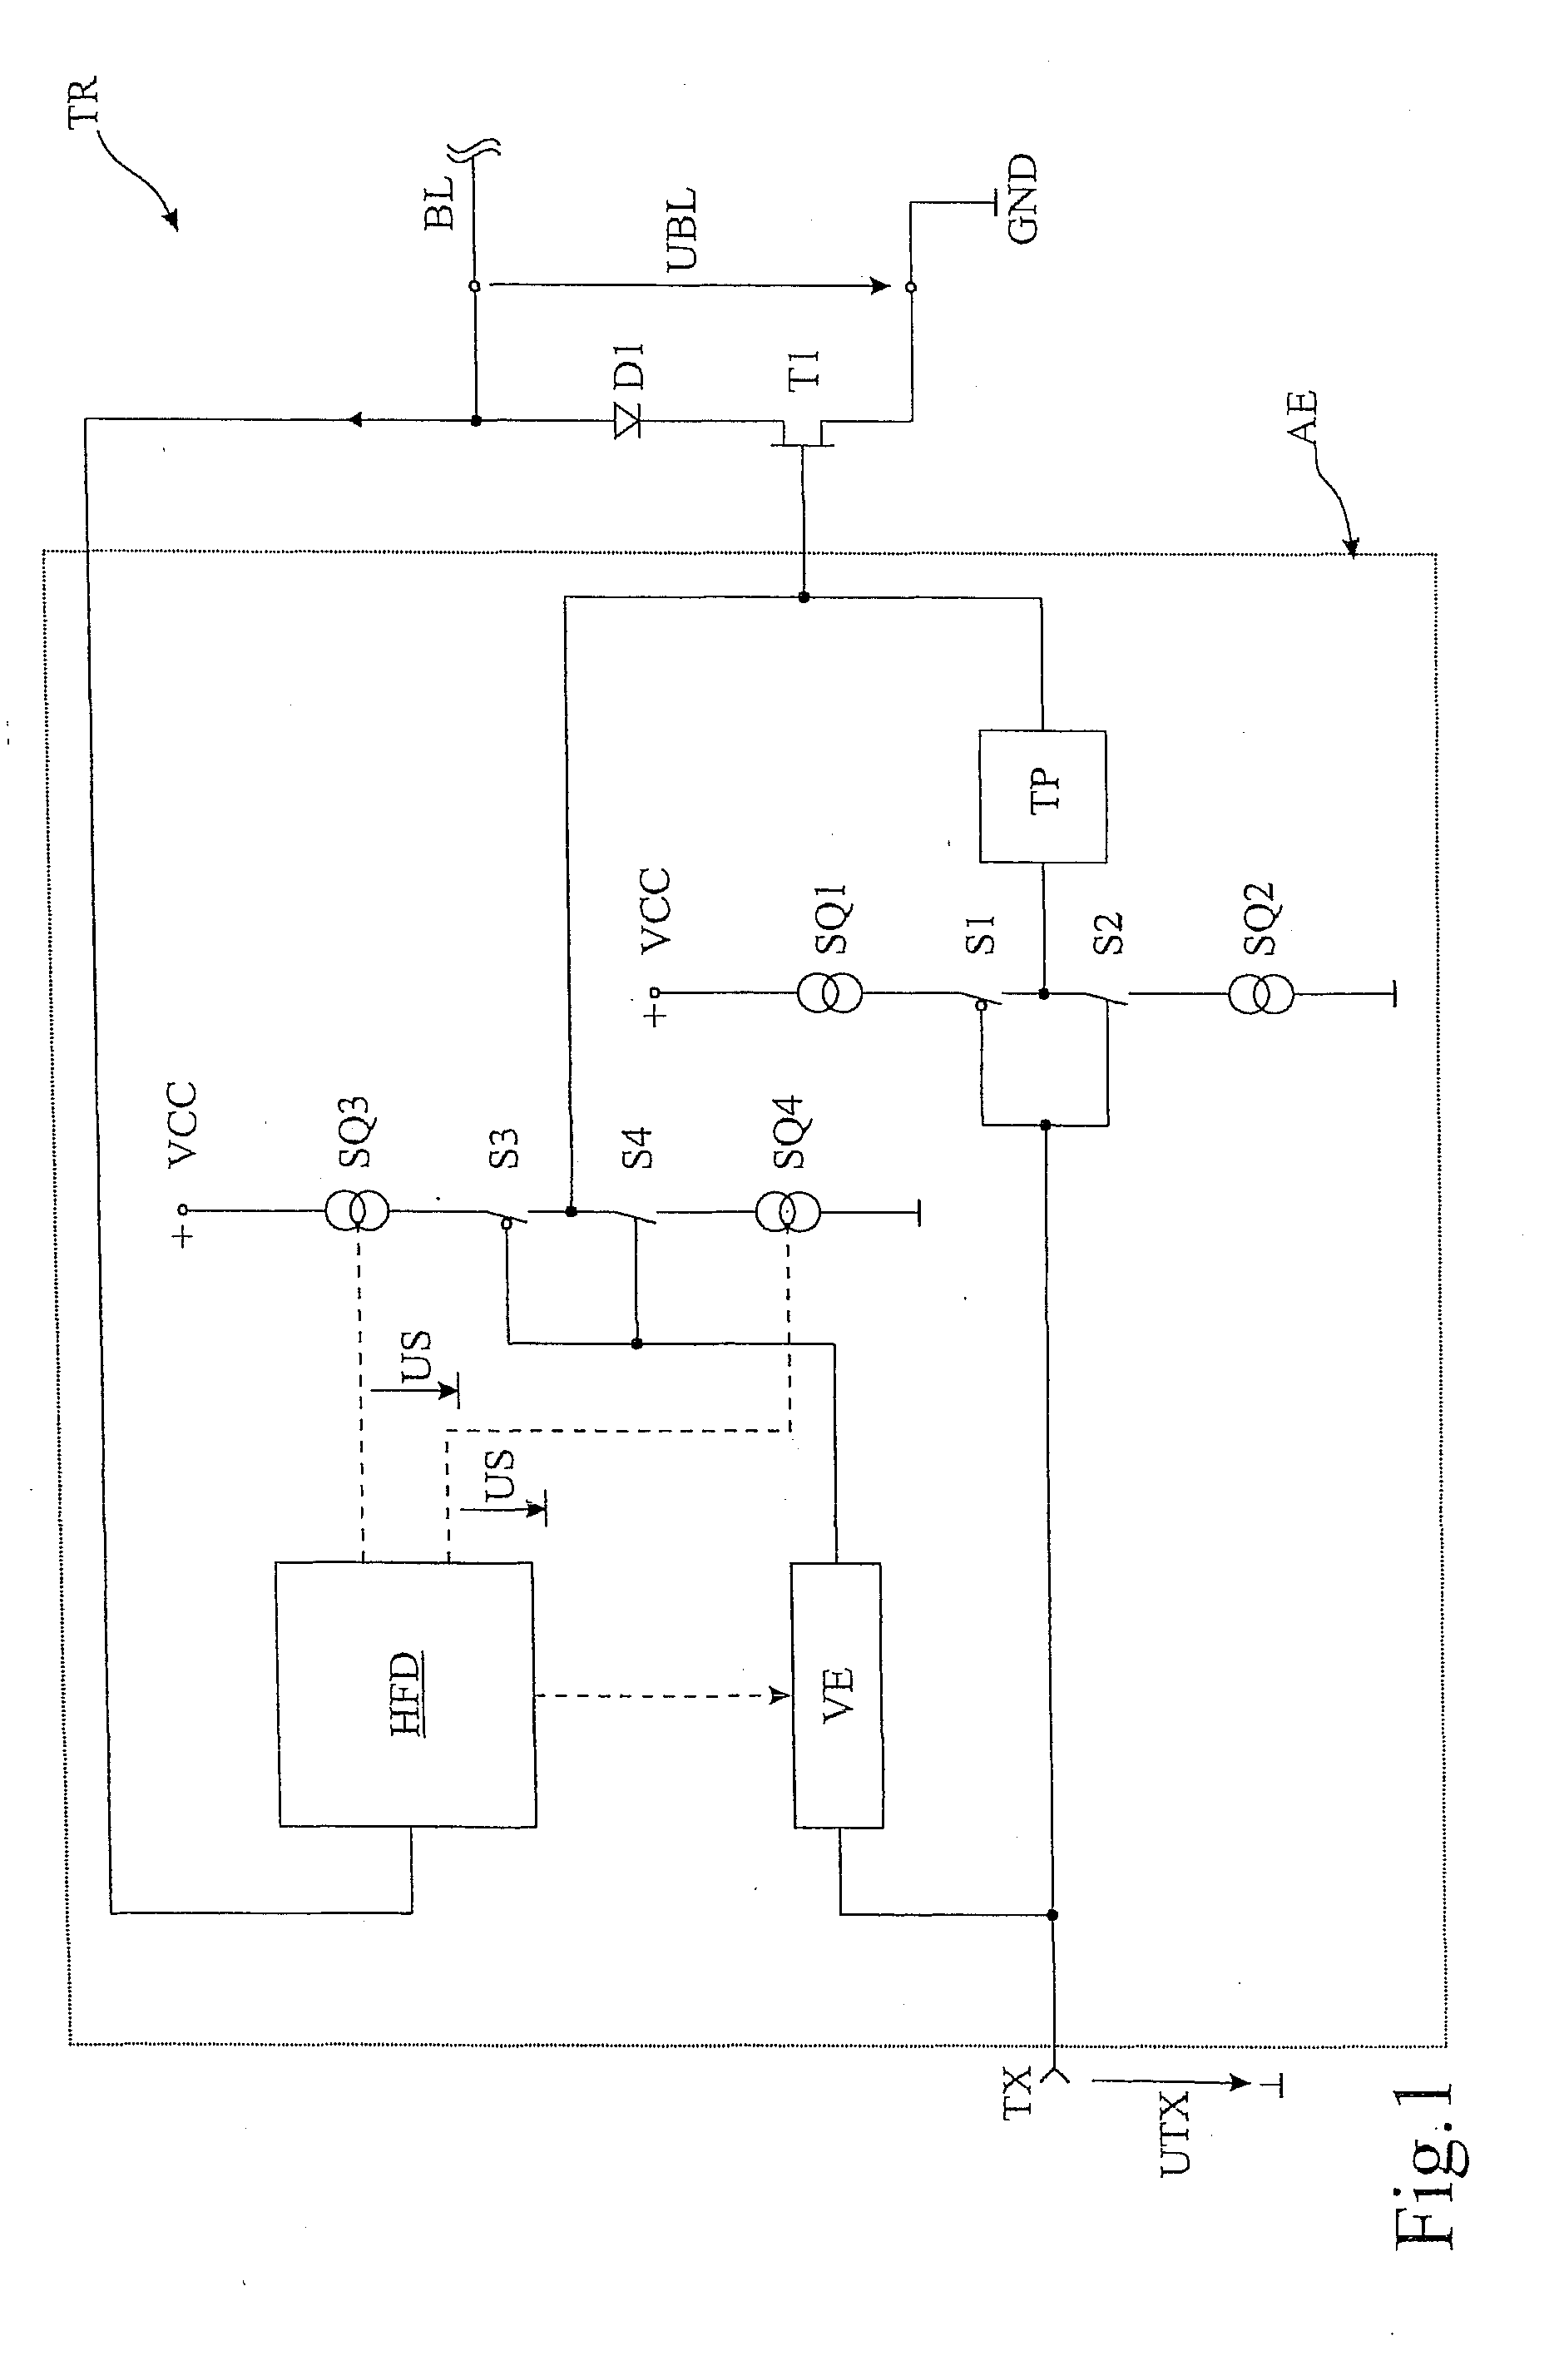 Method for edge formation of signals and transmitter/receiver component for a bus system